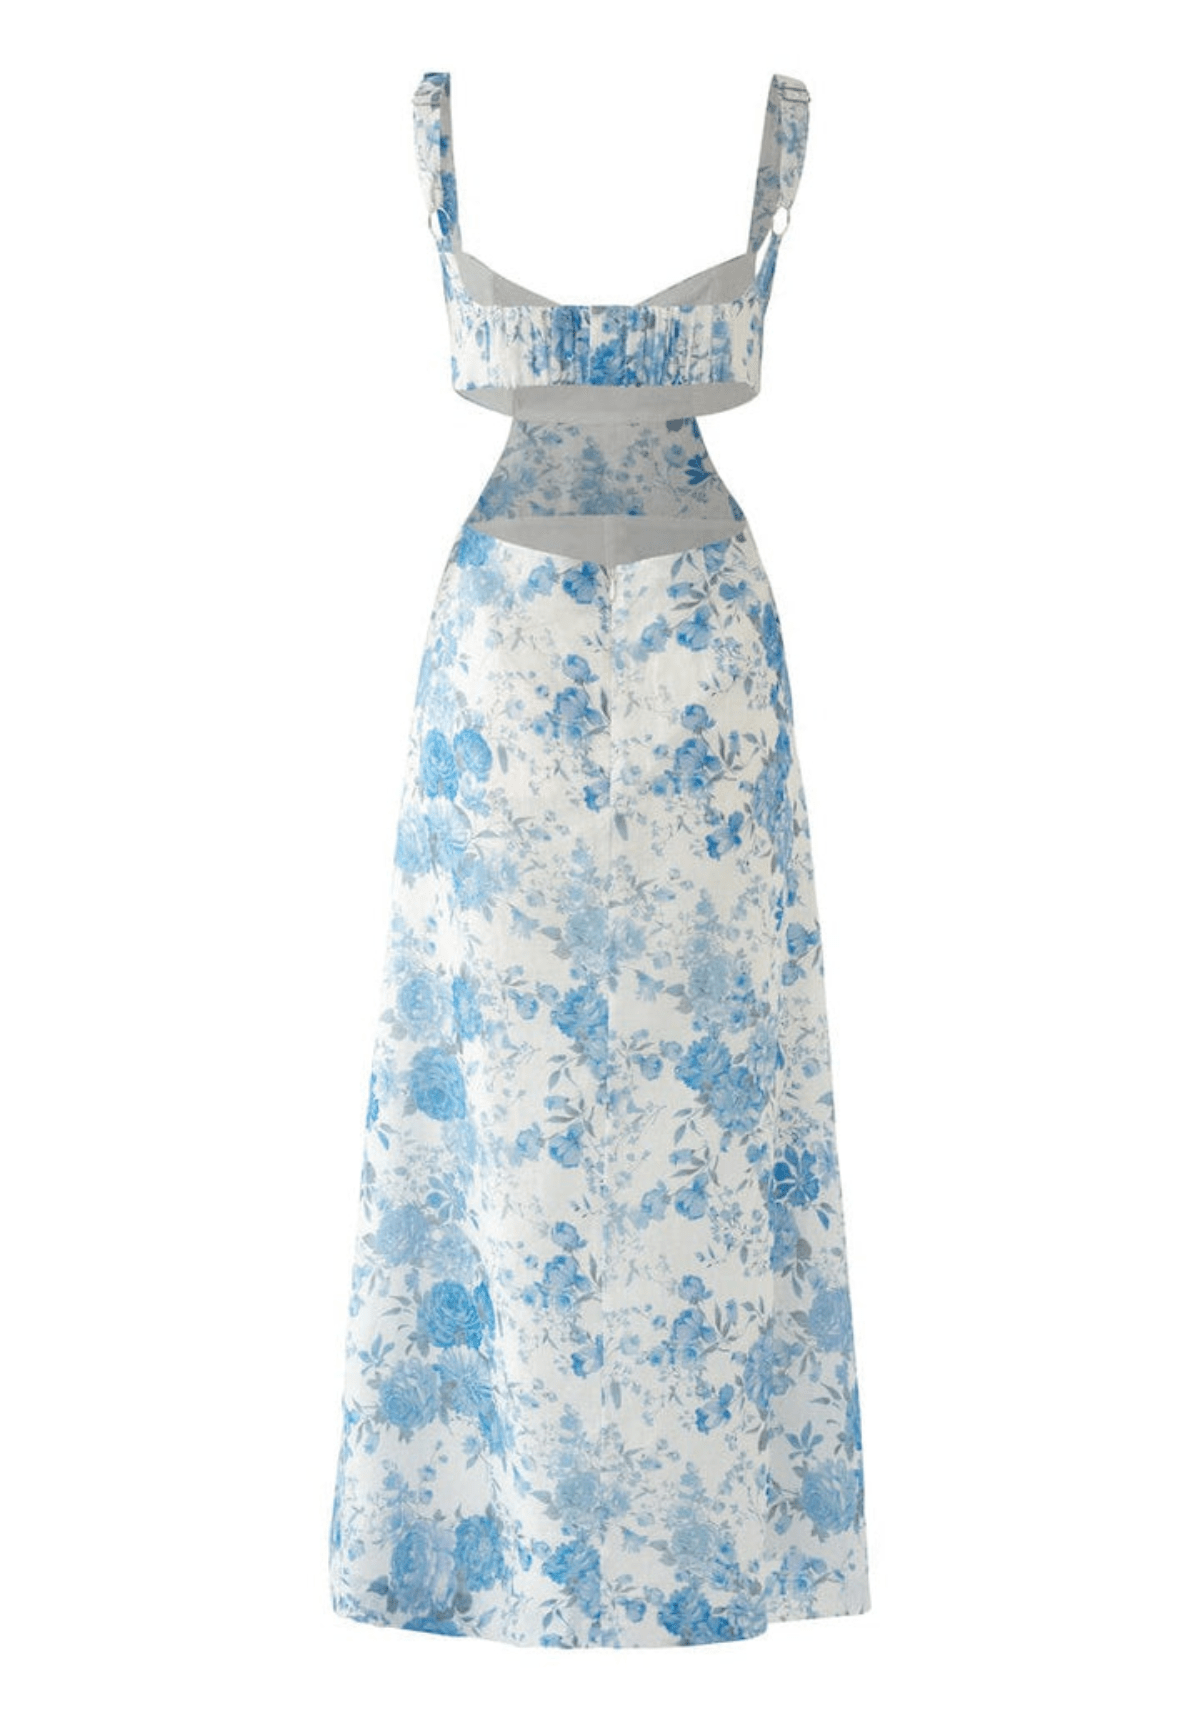 Delilah Cut Out Midi Dress - Sky Blue Floral Clothing Sofia The Label 